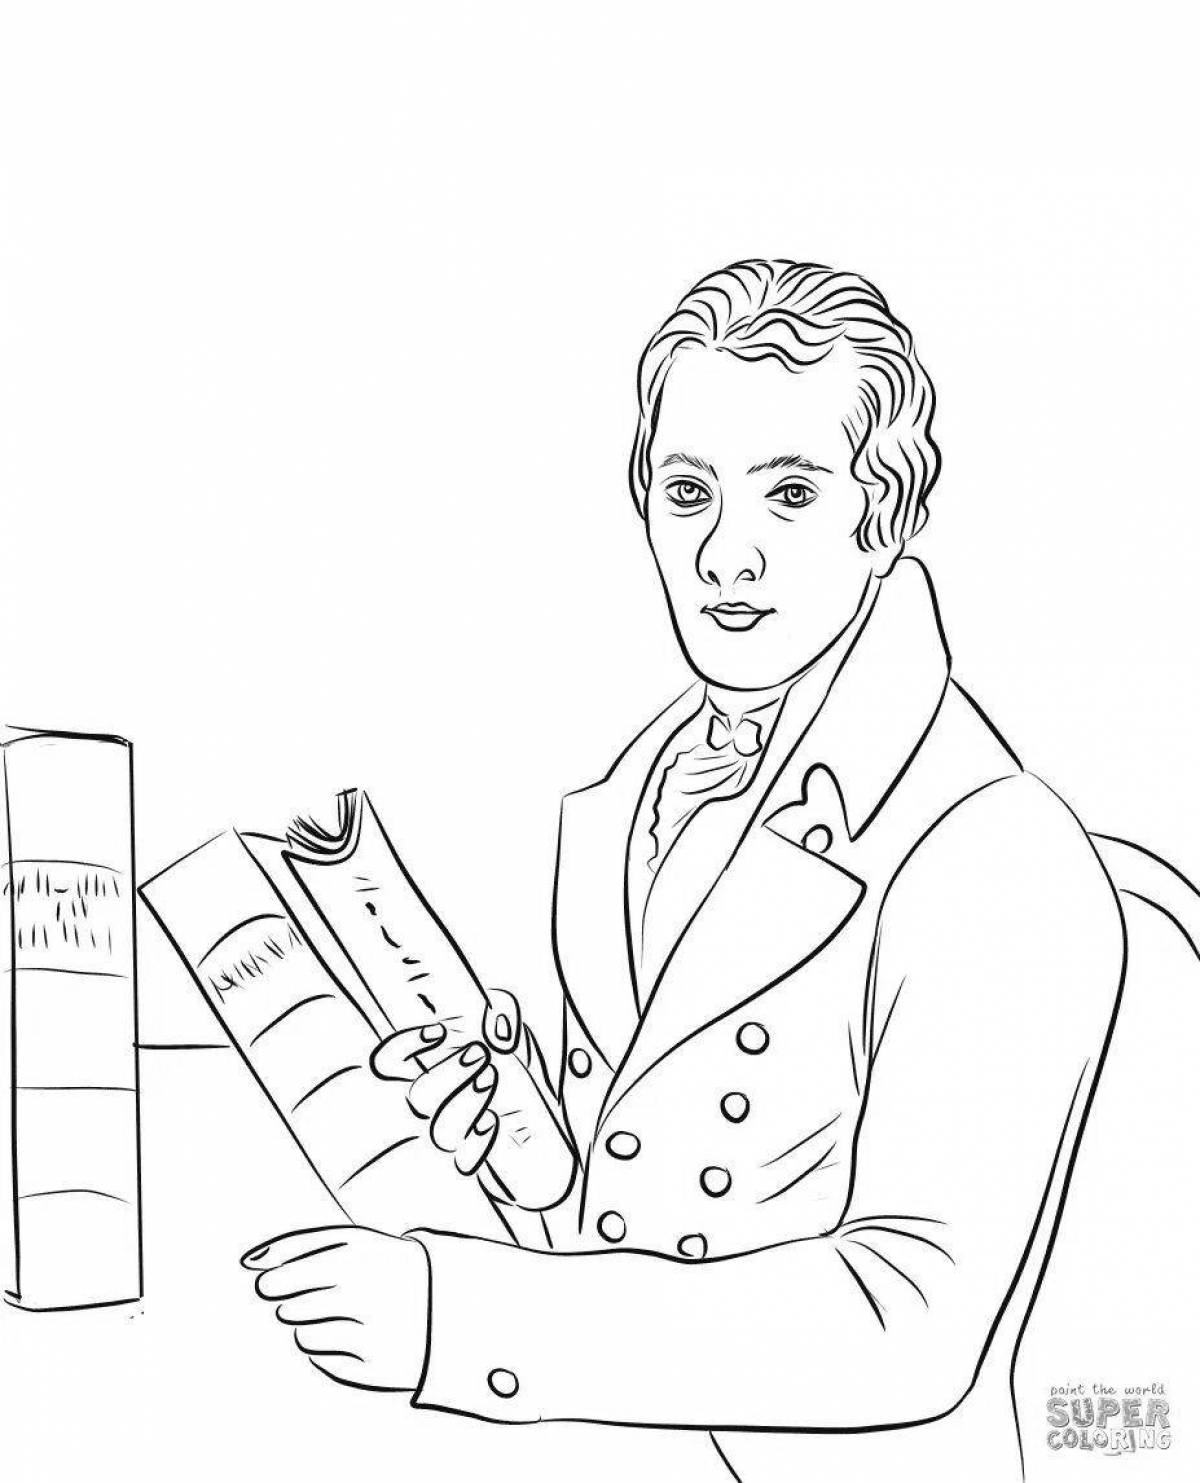 Playful Suvorov coloring book for children